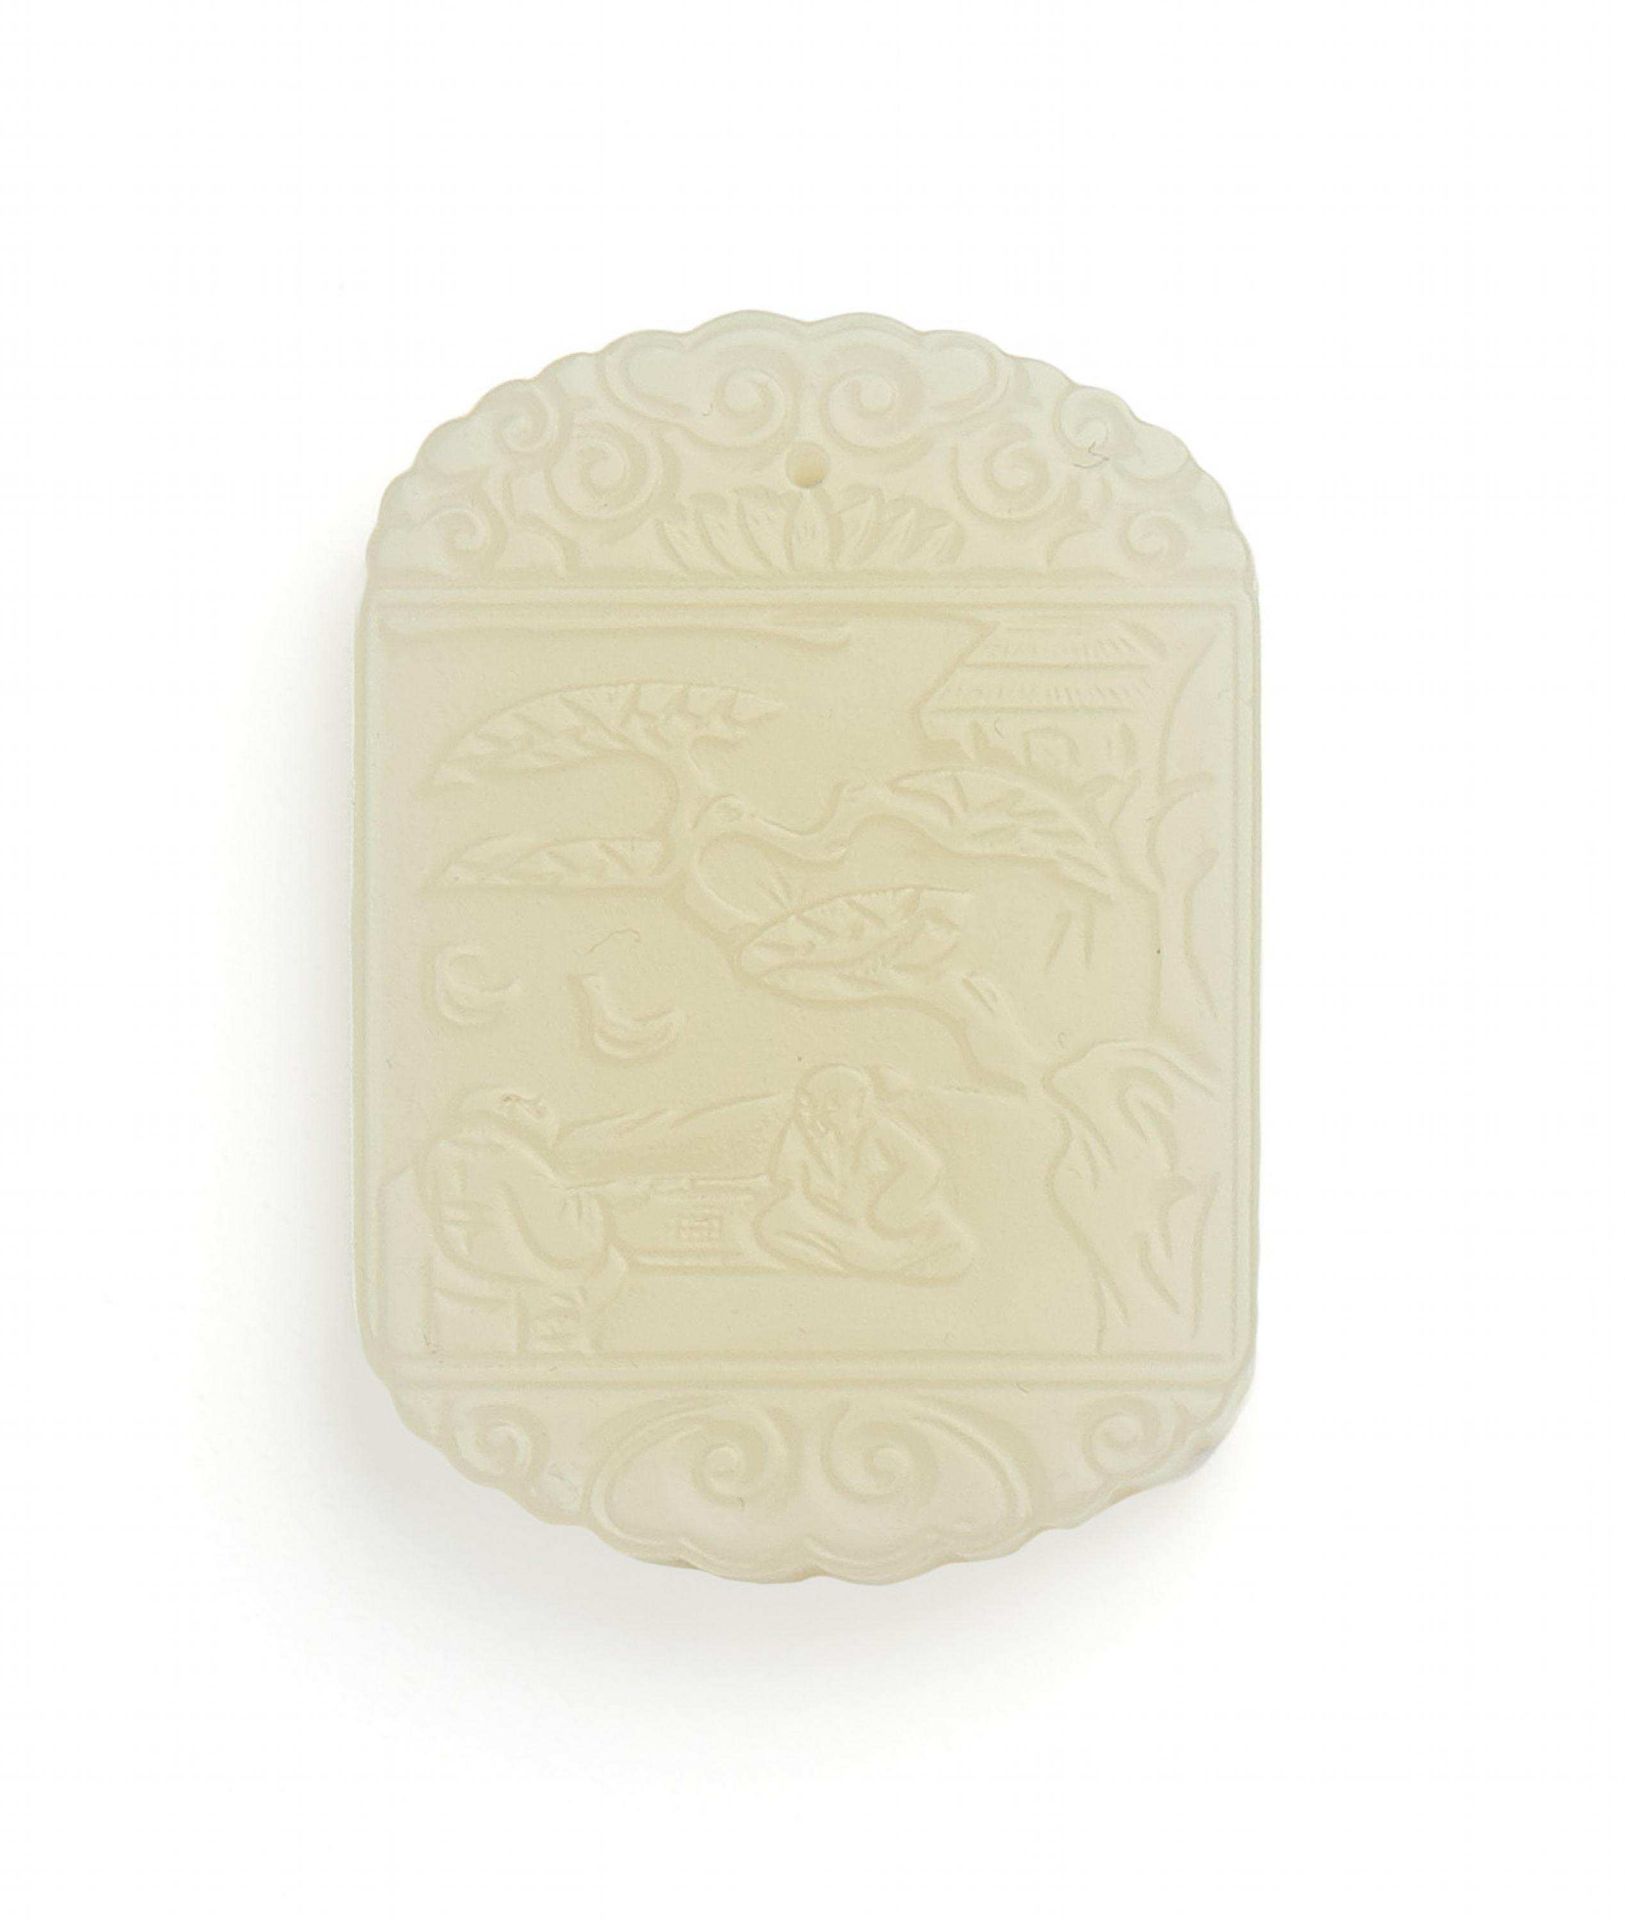 PENDANT WITH LOW RELIEF. China. Greenish white jade. Rectangular, top and bottom rounded. On each